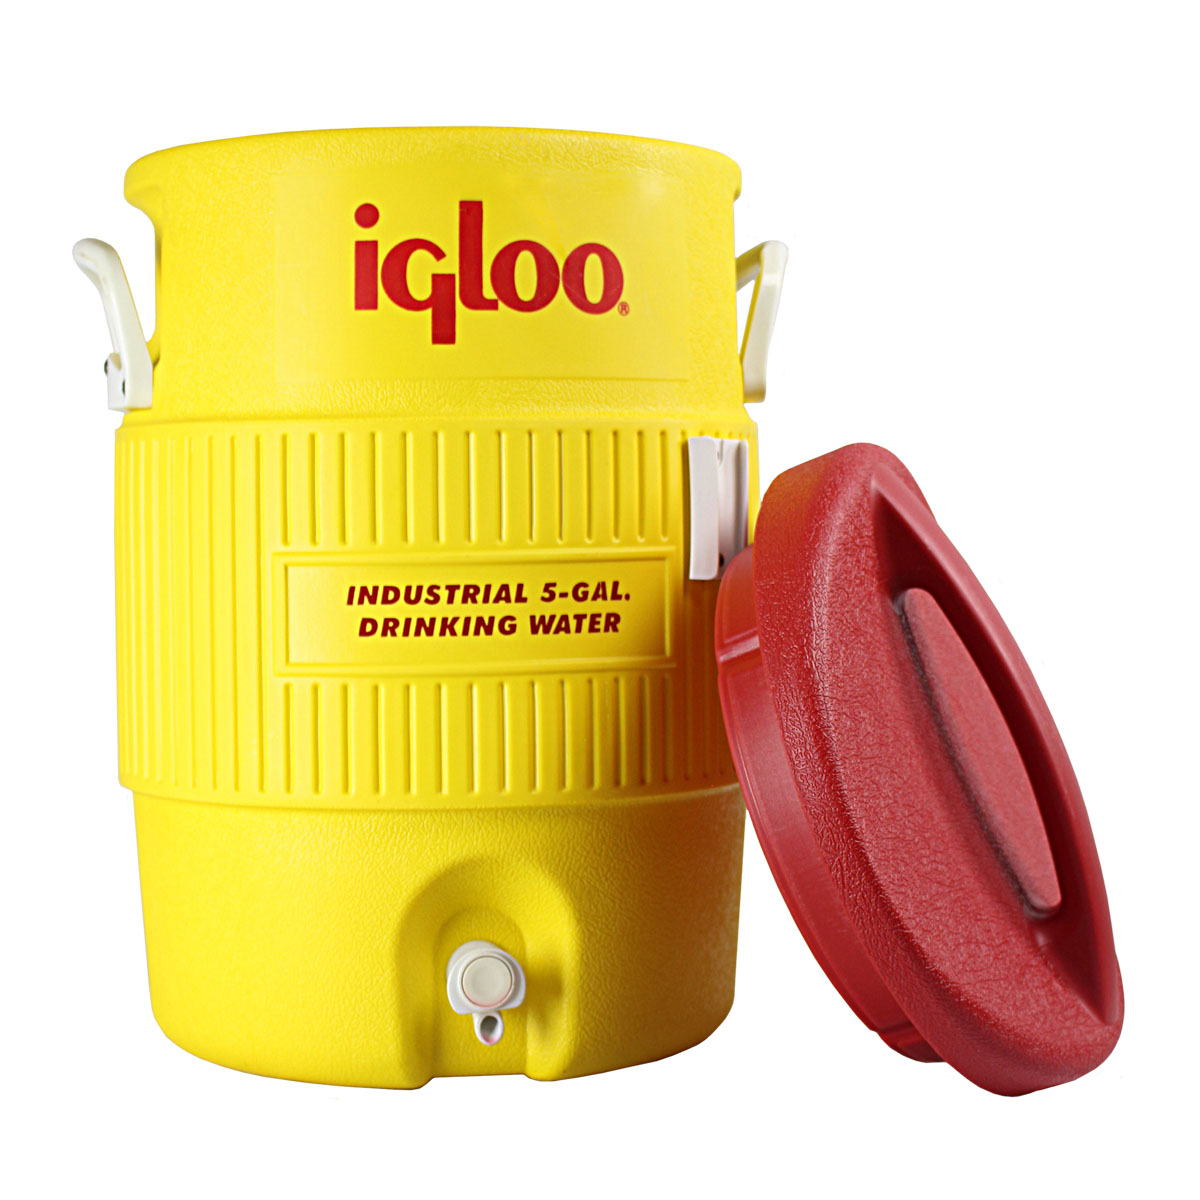 https://cantonchairrental.com/Resources/Images/Equipment_Guide/Igloo_5gal_Yellow2.jpg